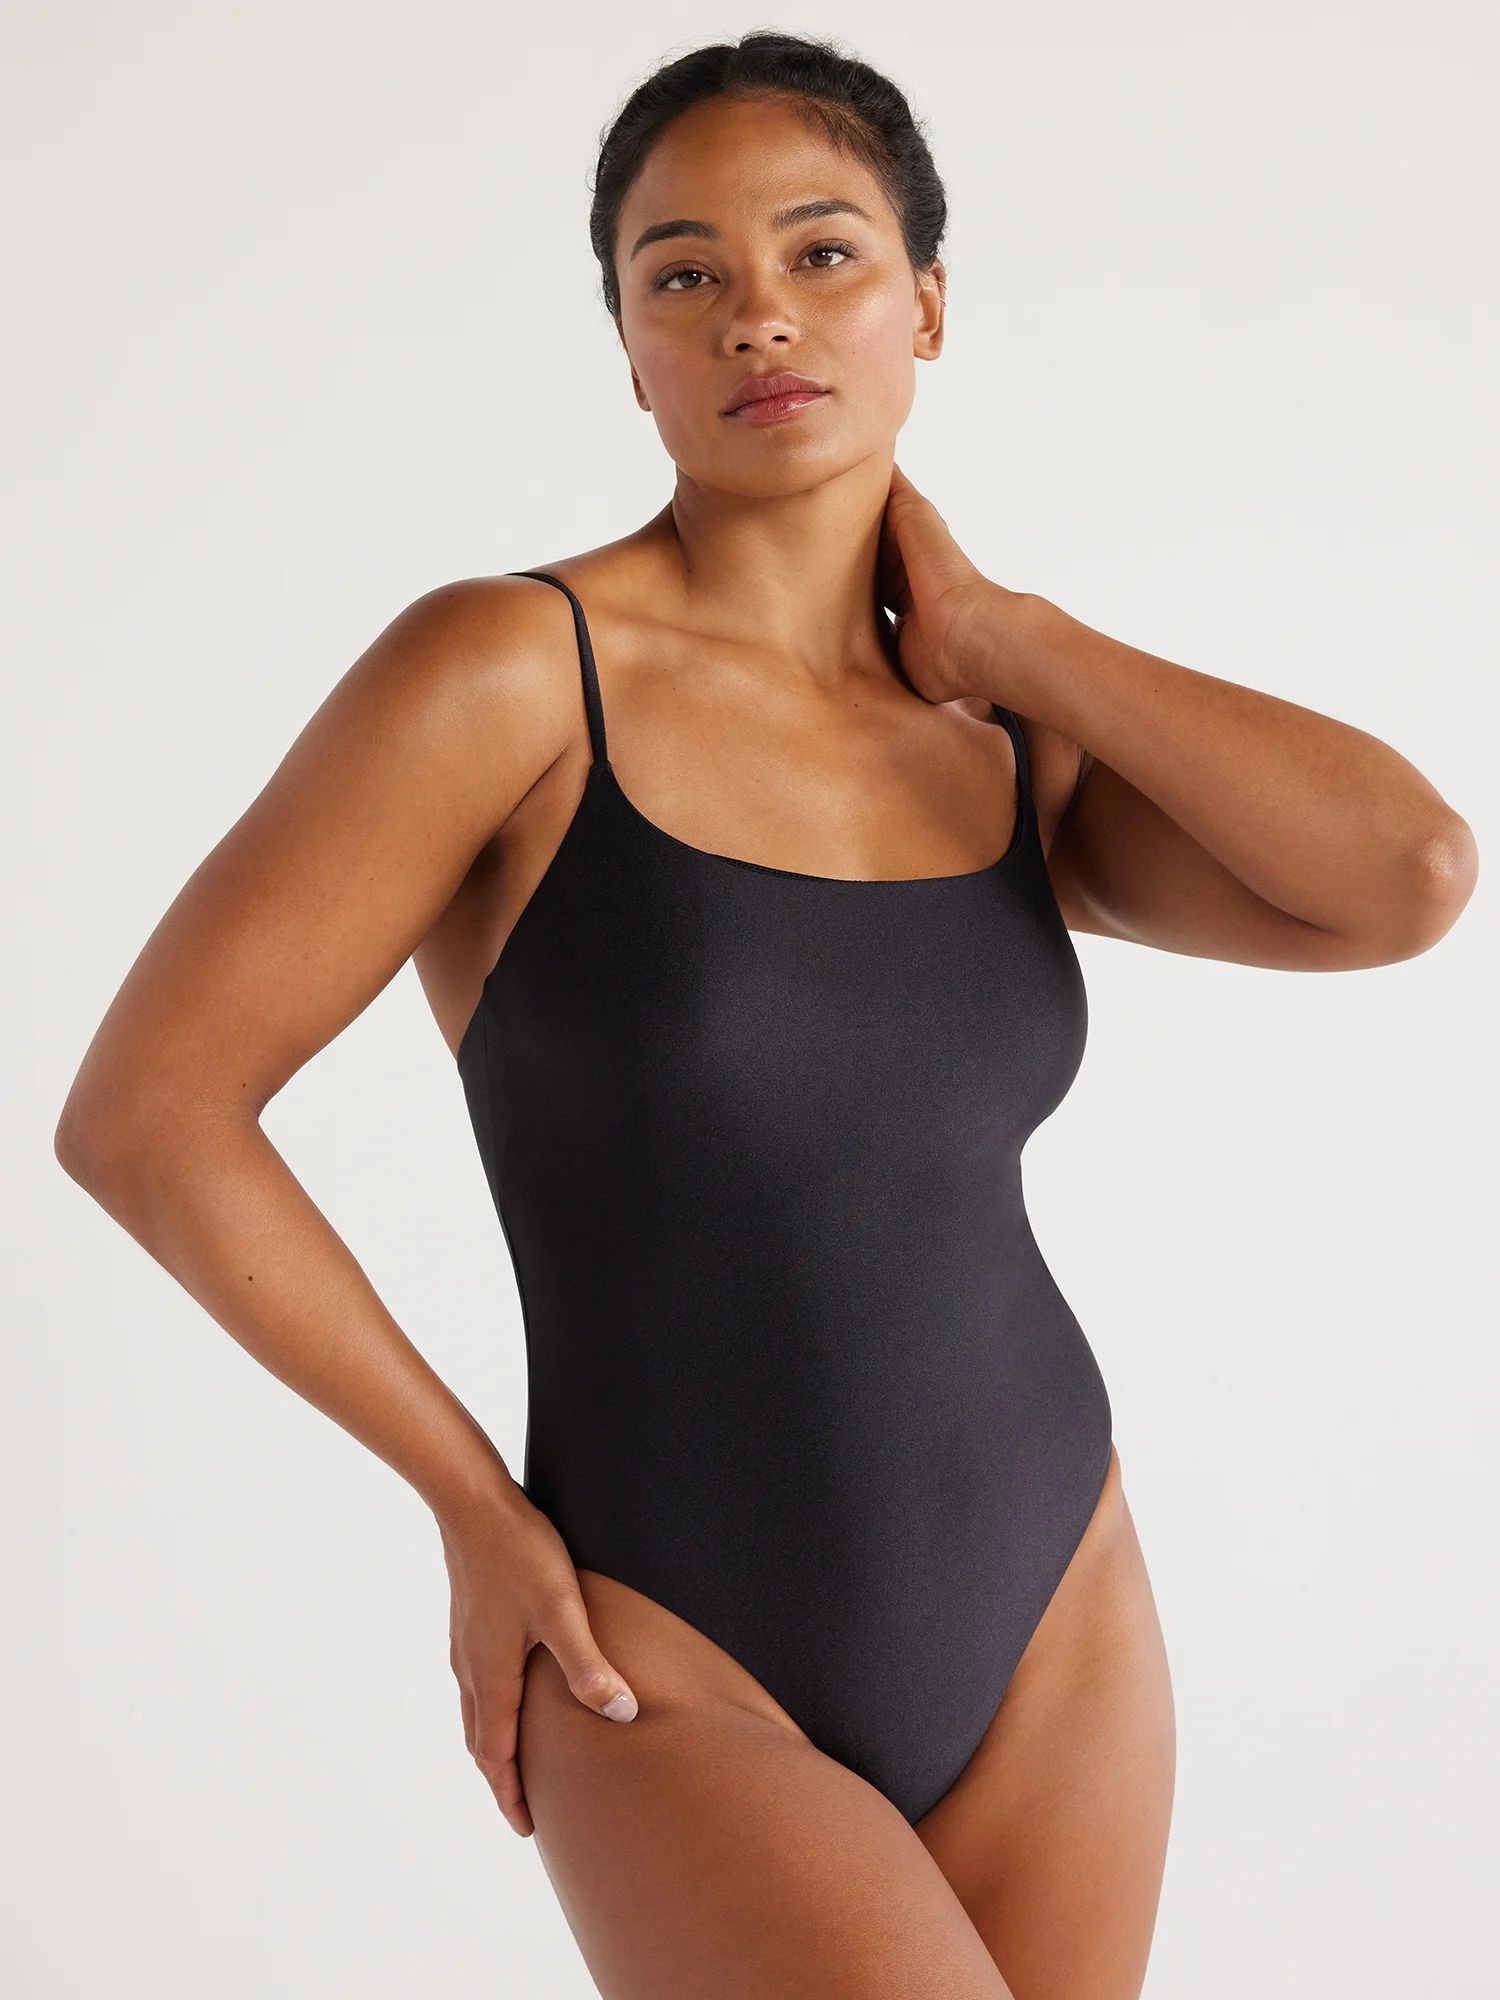 Love & Sports Women's Shimmer Scoop Neck One-Piece Swimsuit with Adjustable Straps, Sizes XS-XXL | Walmart (US)